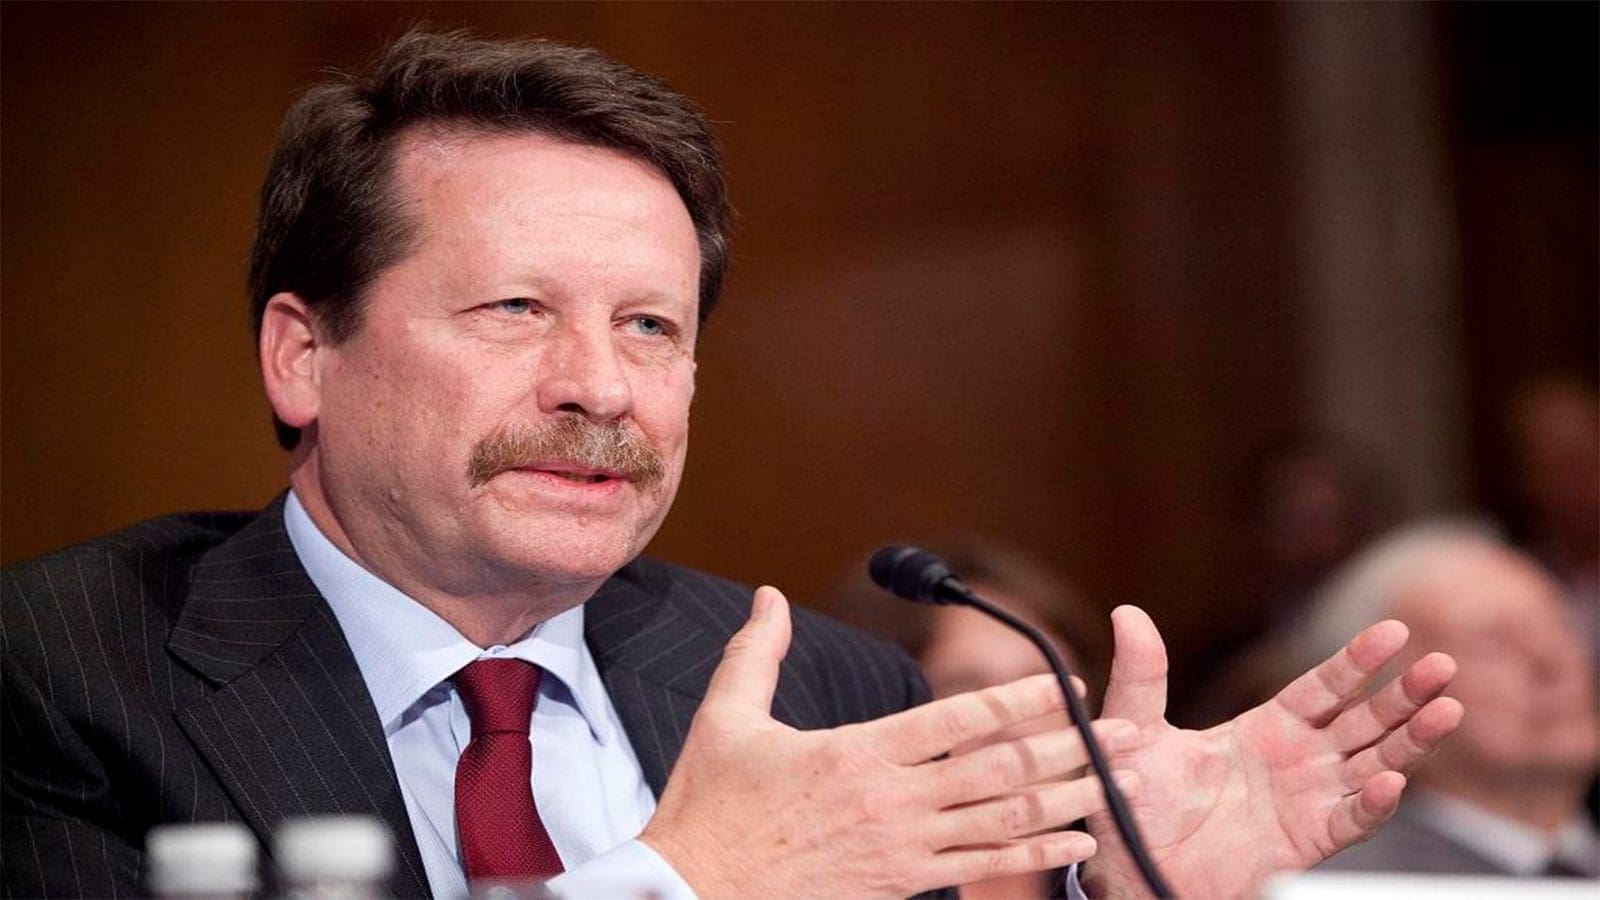 Dr. Robert Califf approved as new FDA Commissioner